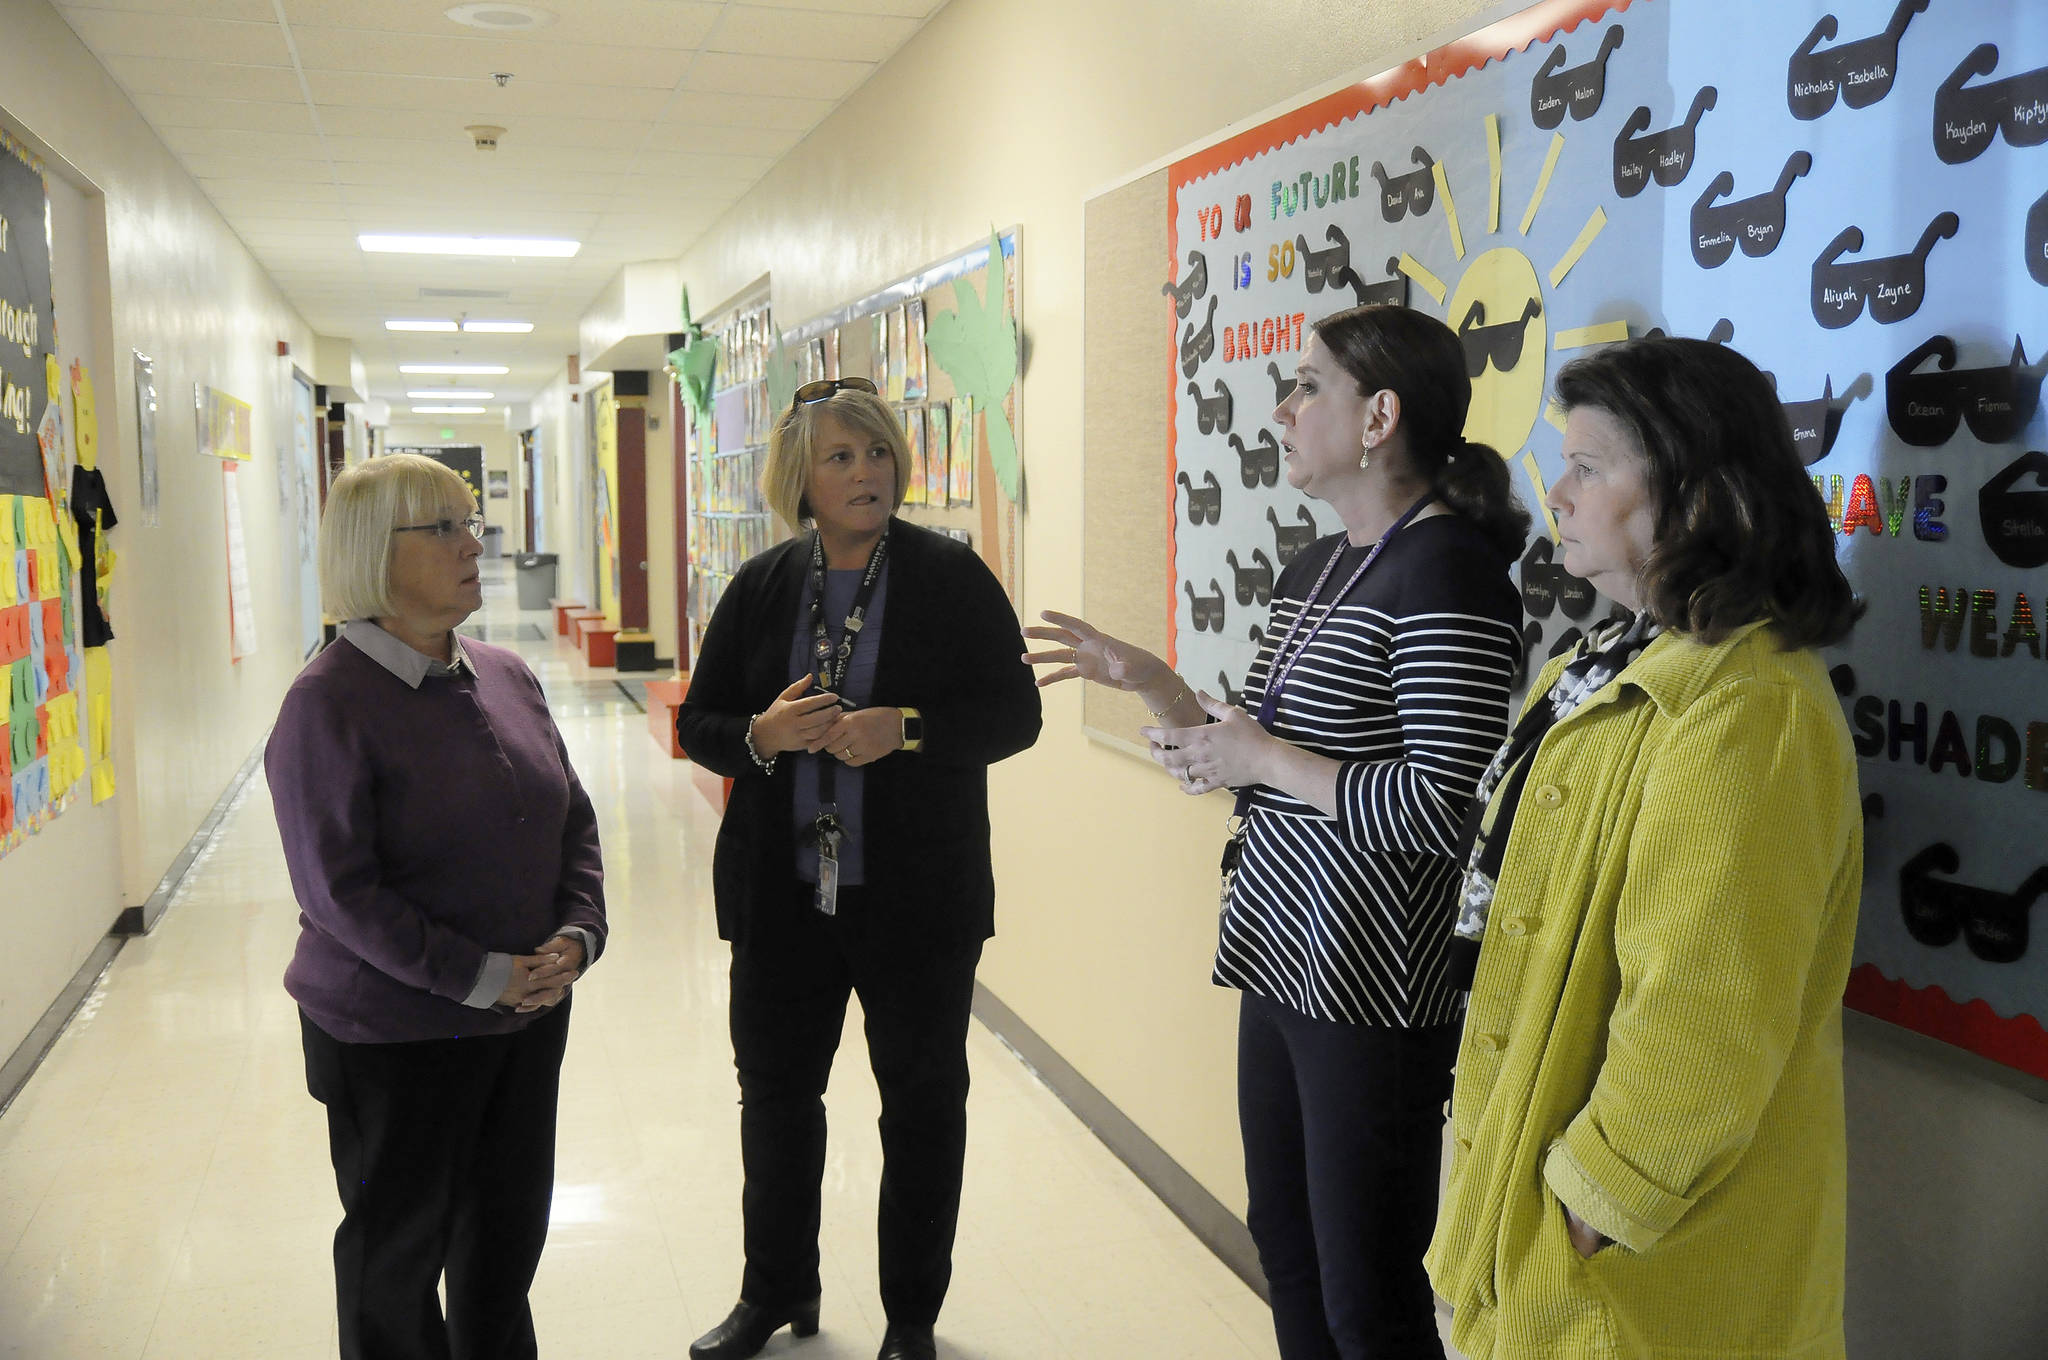 Literacy coach Krista Chatters, second from right, talks with U.S. Sen. Patty Murray (left) at Greywolf Elementary School on Oct. 11. Also pictured is Greywolf principal Donna Hudson, second from left, and mathematics coach Pam Landoni. Sequim Gazette photo by Michael Dashiell